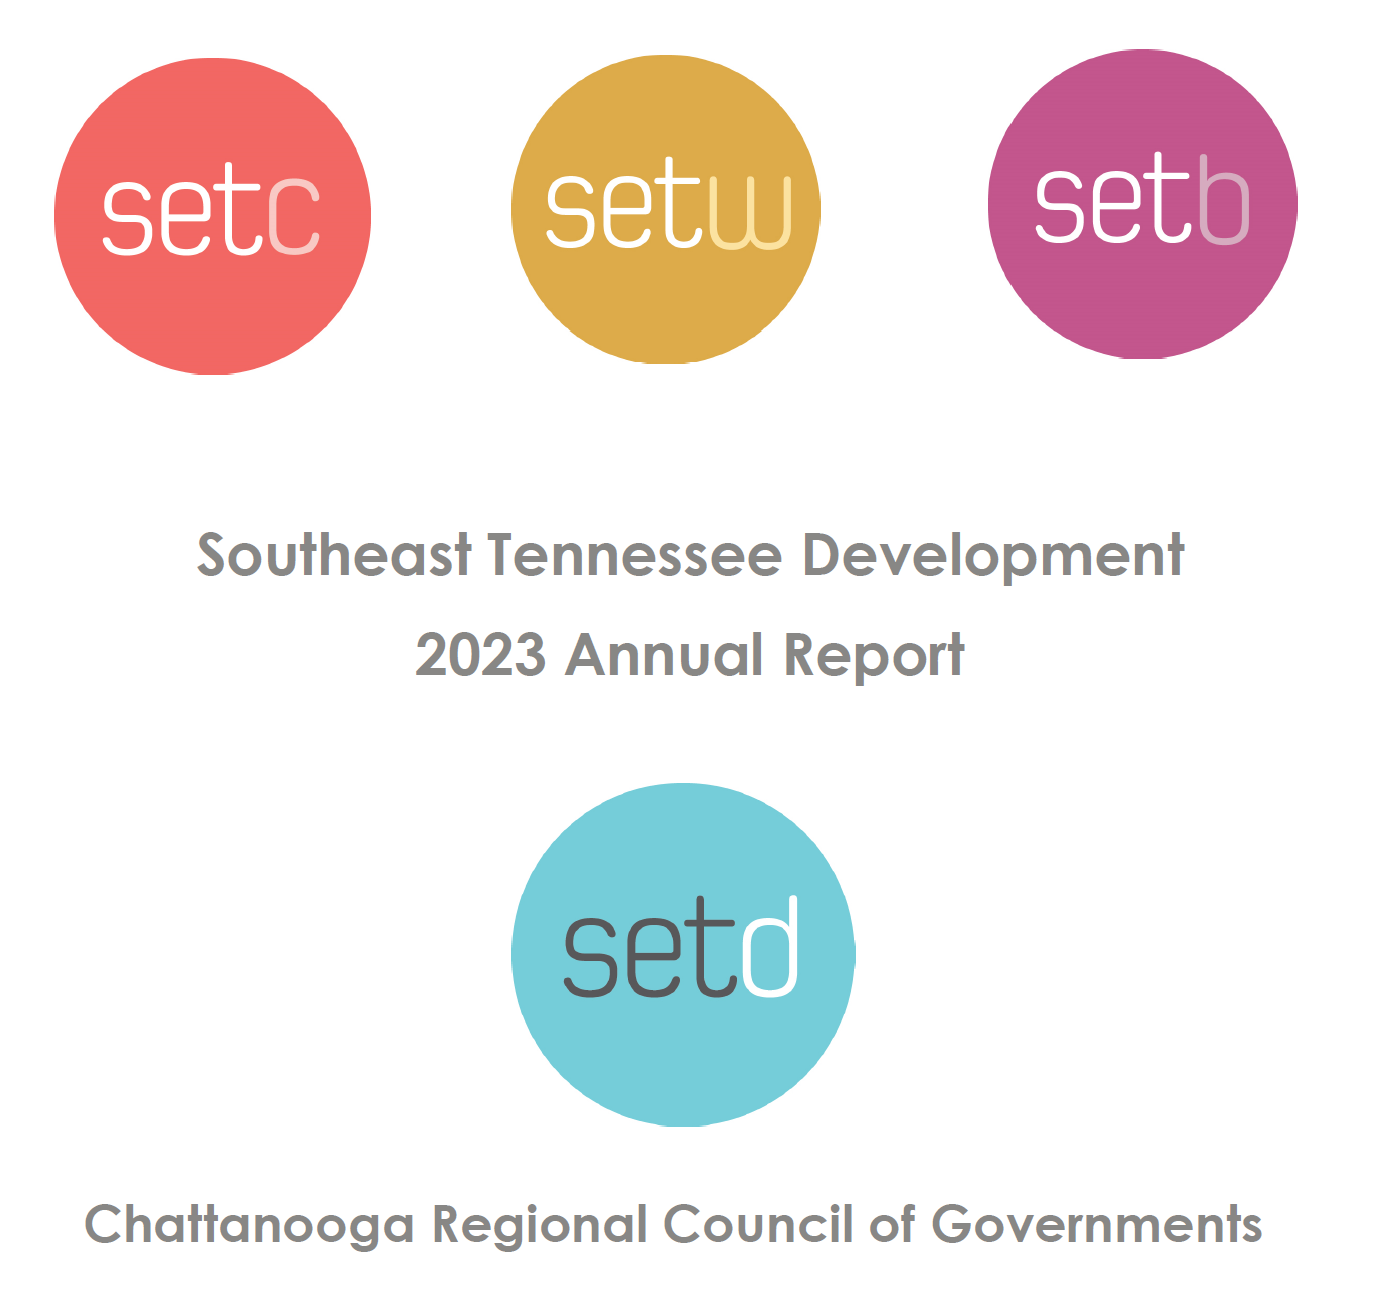 This year our 2023 Annual Report focuses on the improvements being made throughout the region post pandemic. Staff are hard at work helping our regional communities with the imple-mentation process of building back and assisting with the startup of much-needed infrastructure improvements. Currently, staff has maintained local planning assistance to twenty-eight communities, as well as aiding our older adults through various programs such as home delivered meals, transportation, and technology classes allowing them to stay connected.